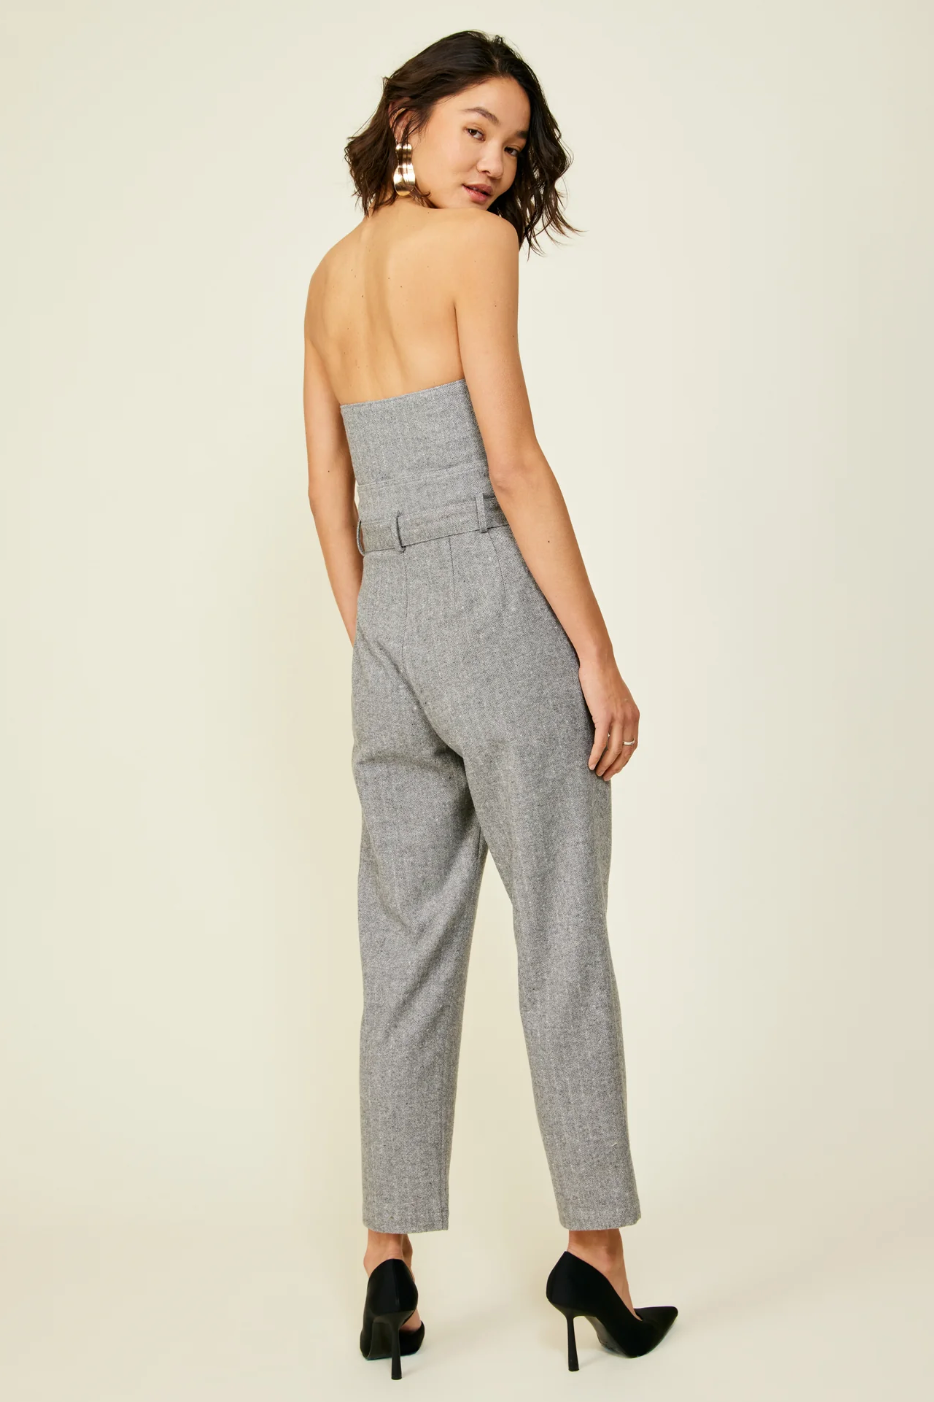 Photo of model wearing Paola Pants in grey featuring a highwaist and fabric belt available at UniKoncept in Waterloo back view